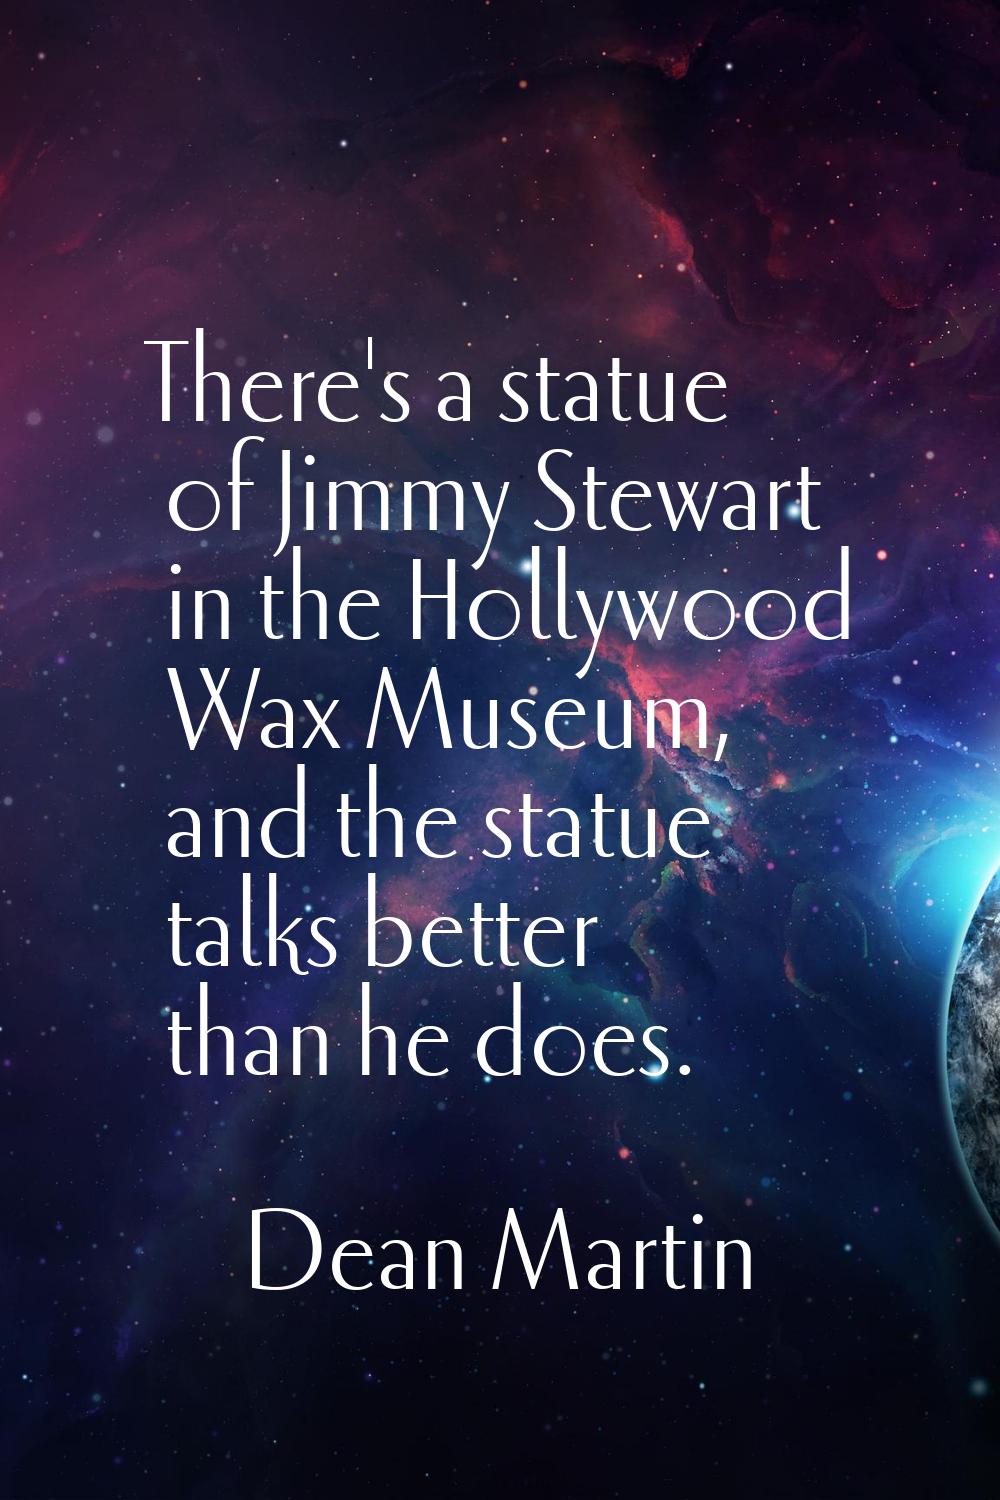 There's a statue of Jimmy Stewart in the Hollywood Wax Museum, and the statue talks better than he 